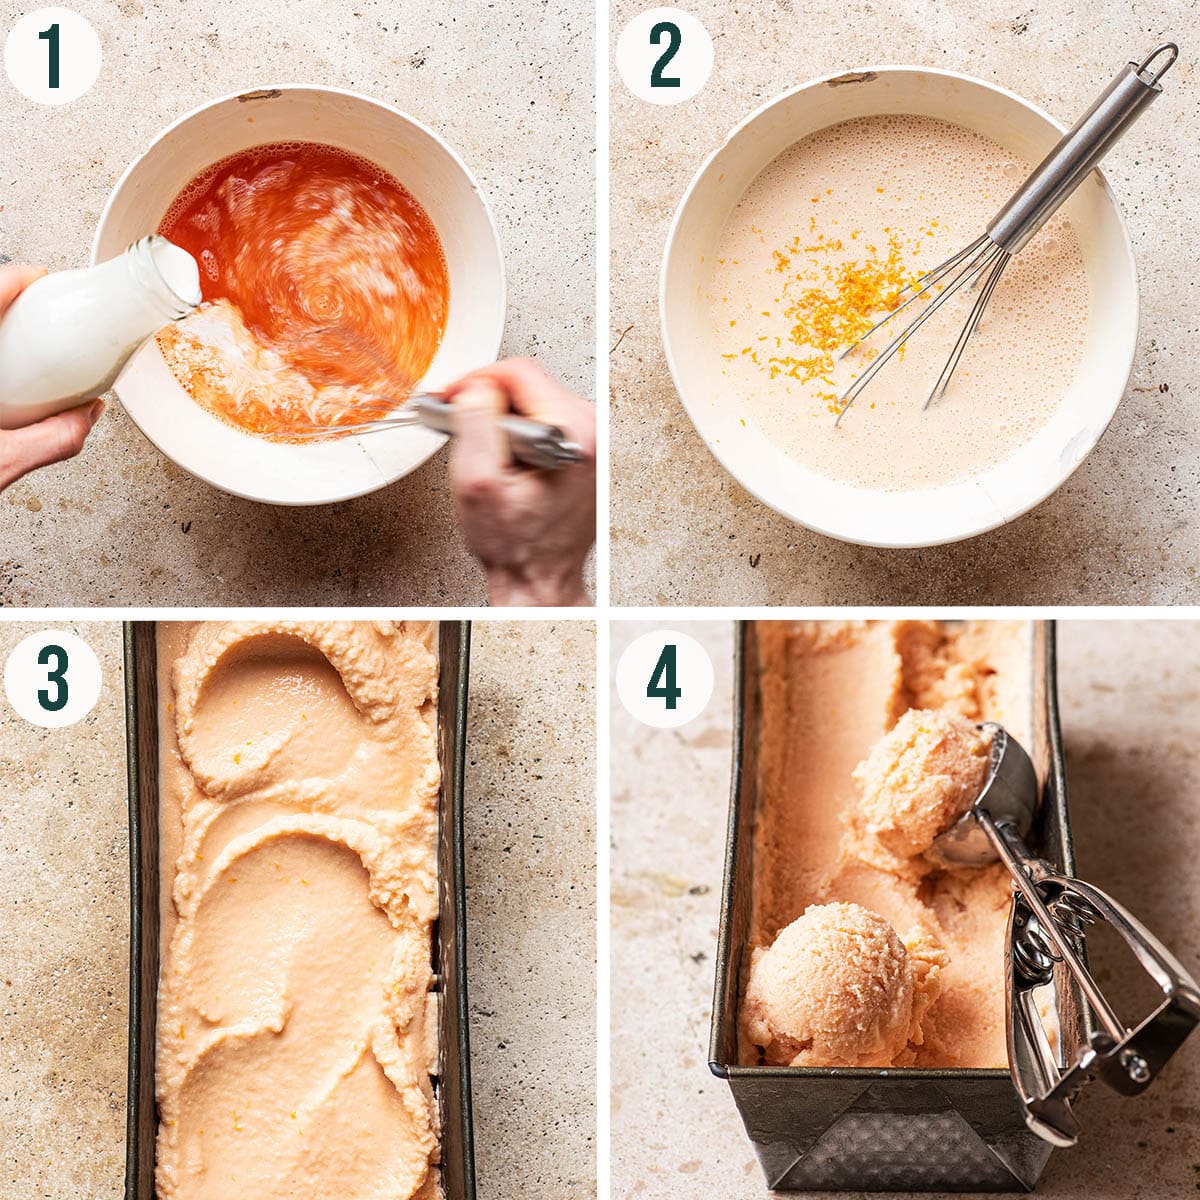 Orange sherbet steps 1 to 4, mixing the base and before and after freezing.